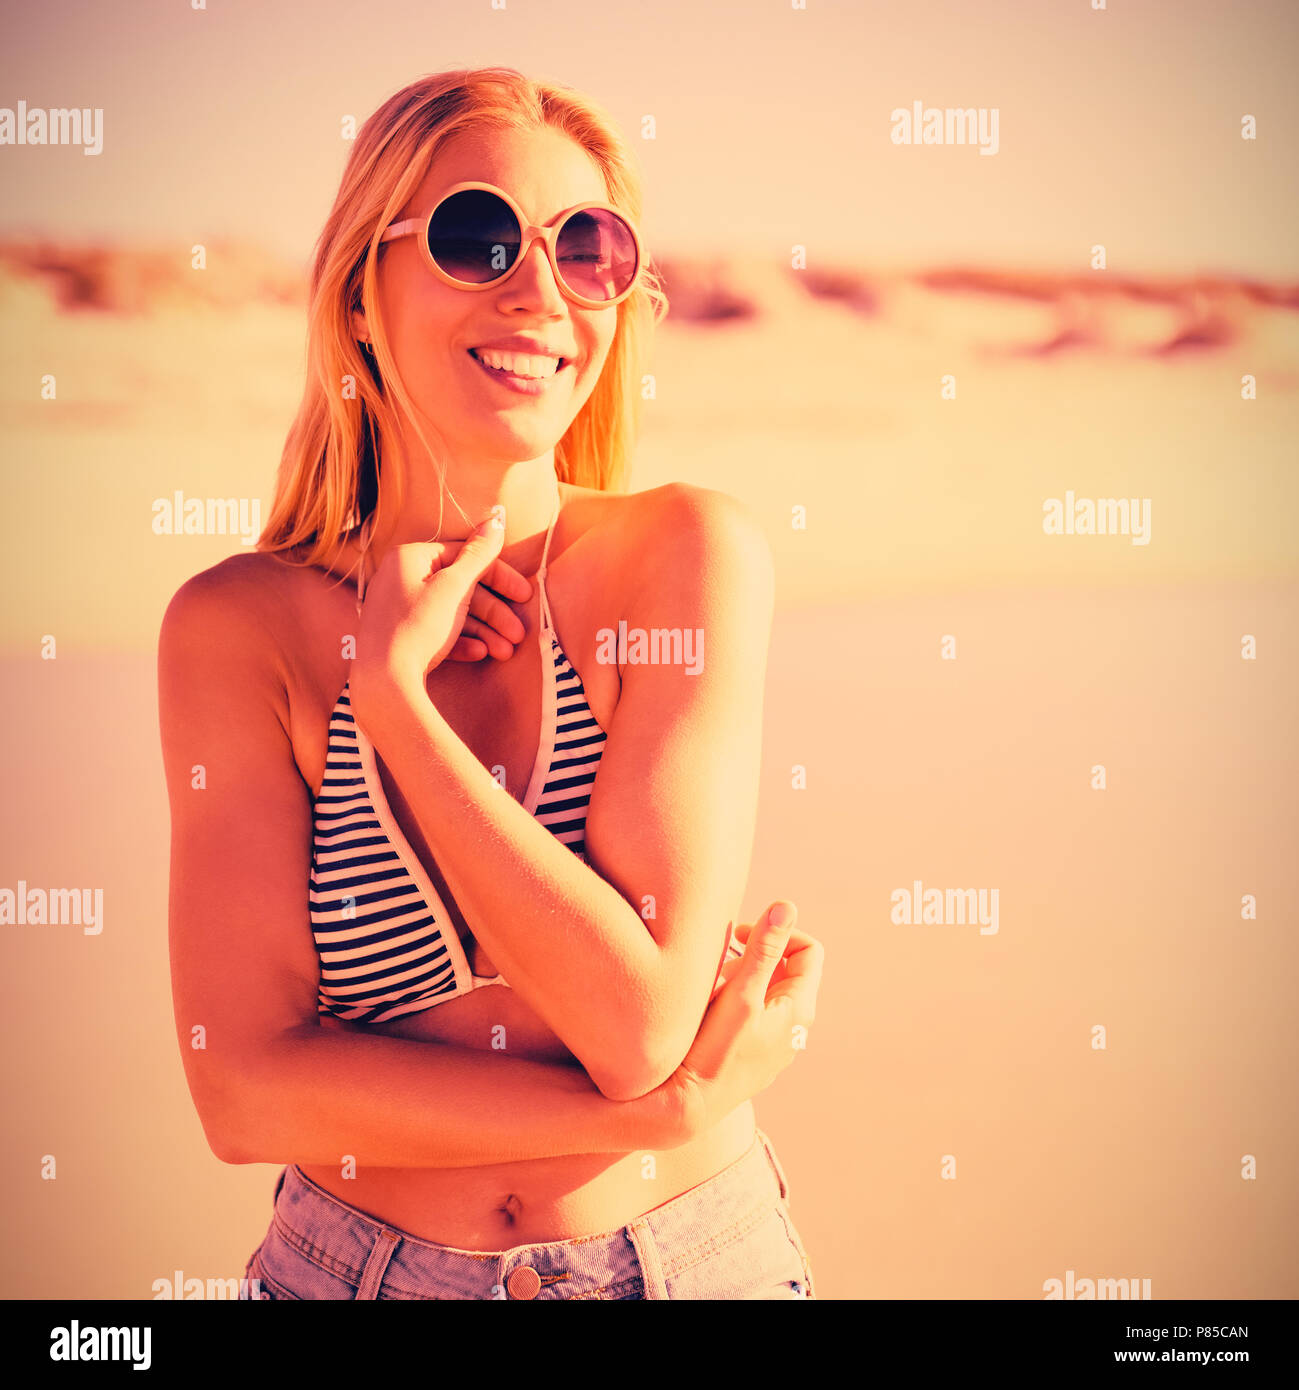 Happy young woman wearing sunglasses at beach Stock Photo